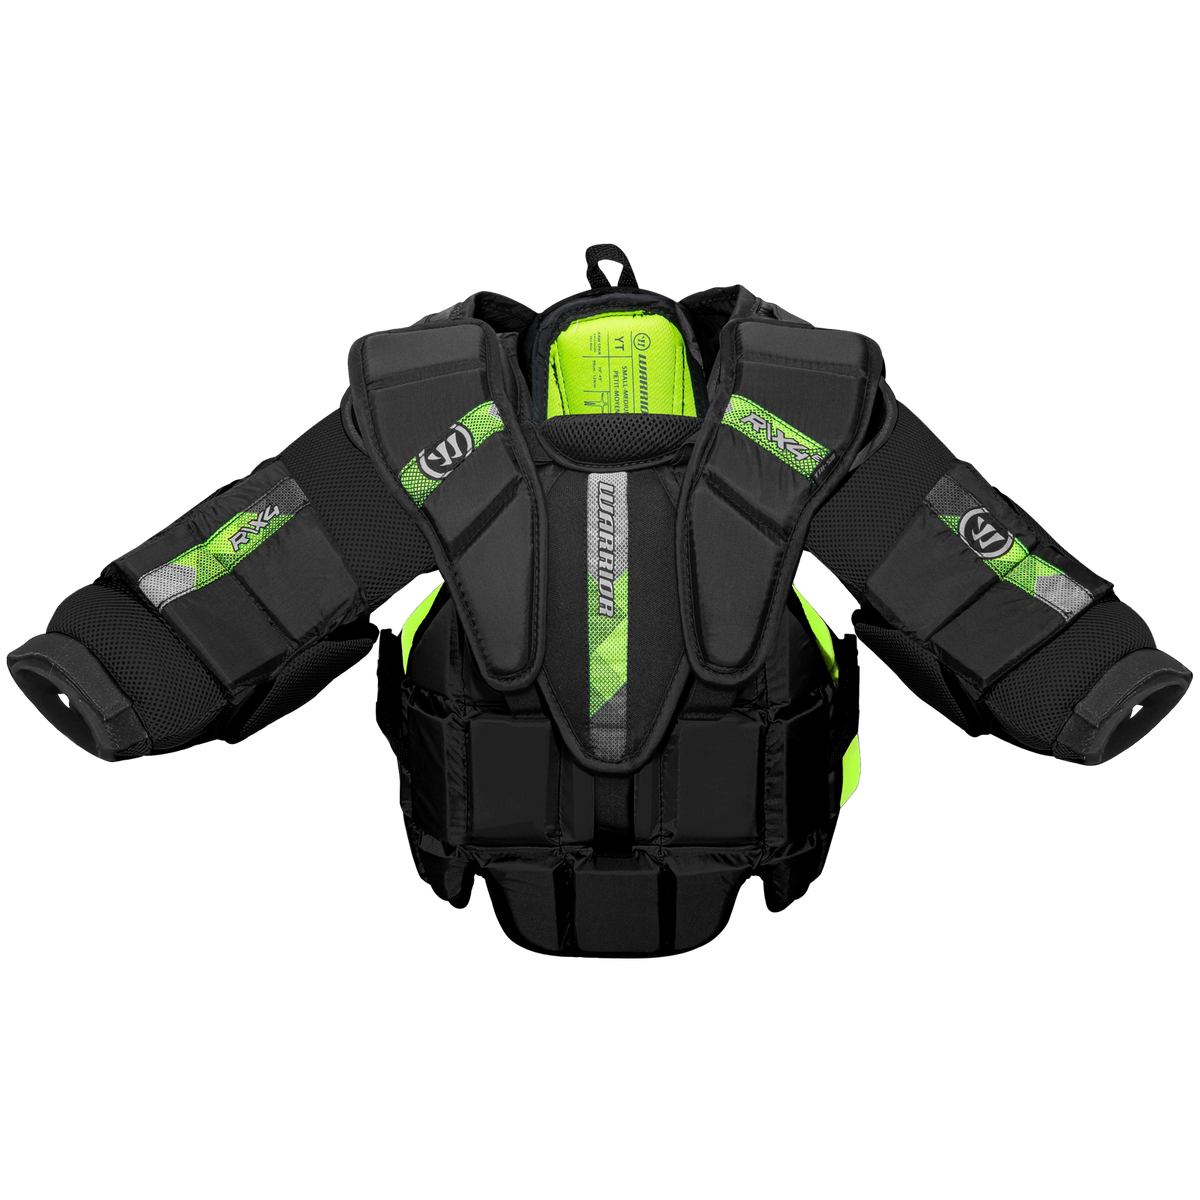 Warrior Ritual X4 E Youth Goalie Chest Protector